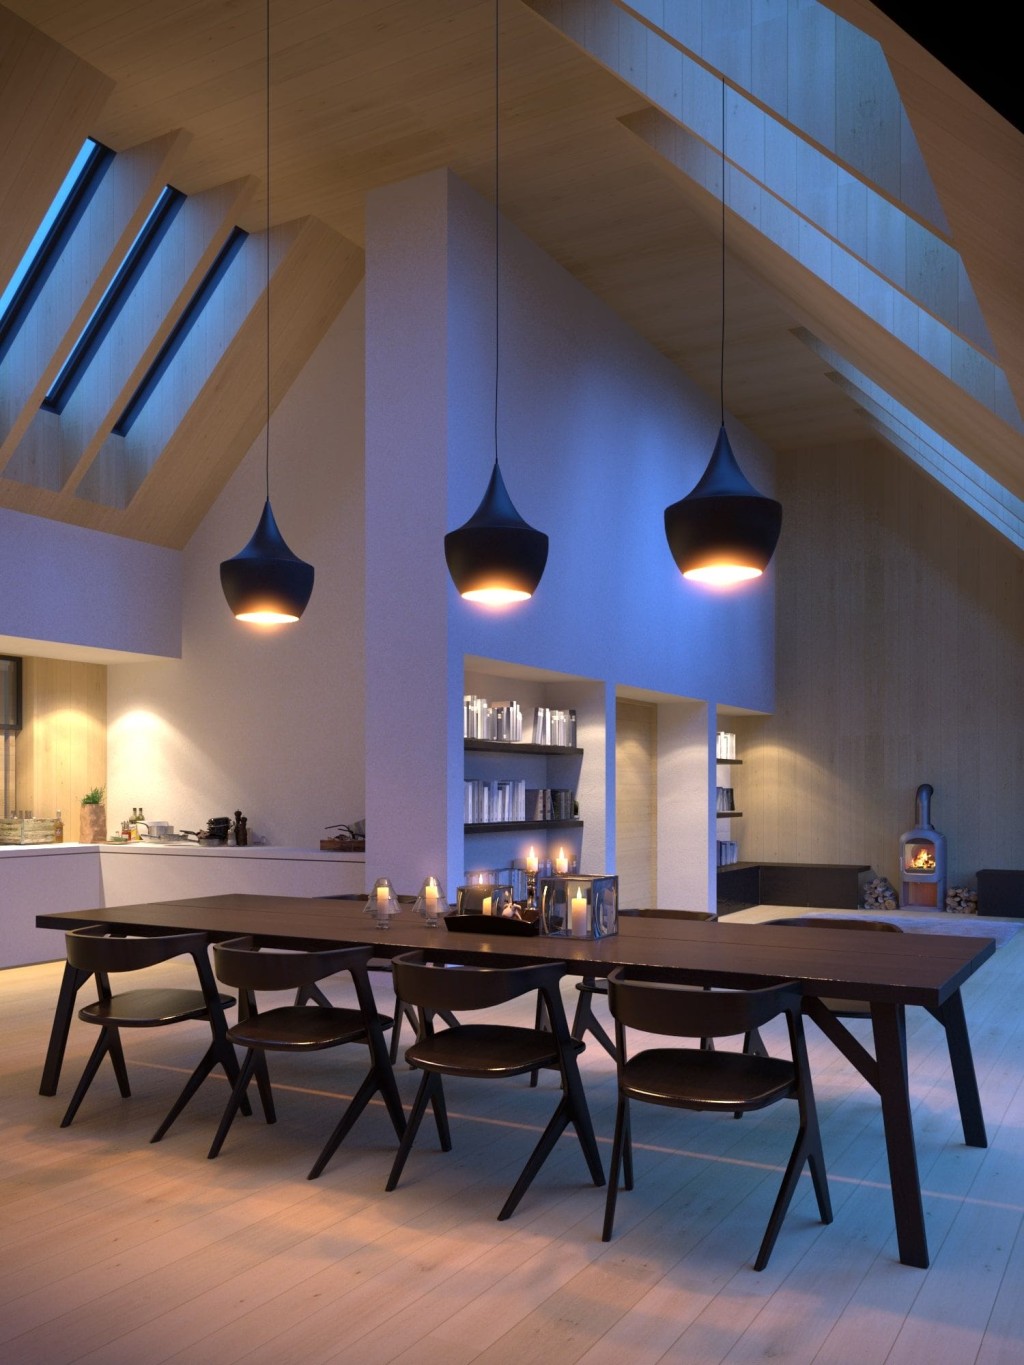 Contemporary dining area in a barn conversion illuminated by stylish pendant lights, featuring an elegant dark wooden table with matching chairs, built-in bookshelves, and a wood stove, set against a backdrop of light wooden walls and angled skylights.